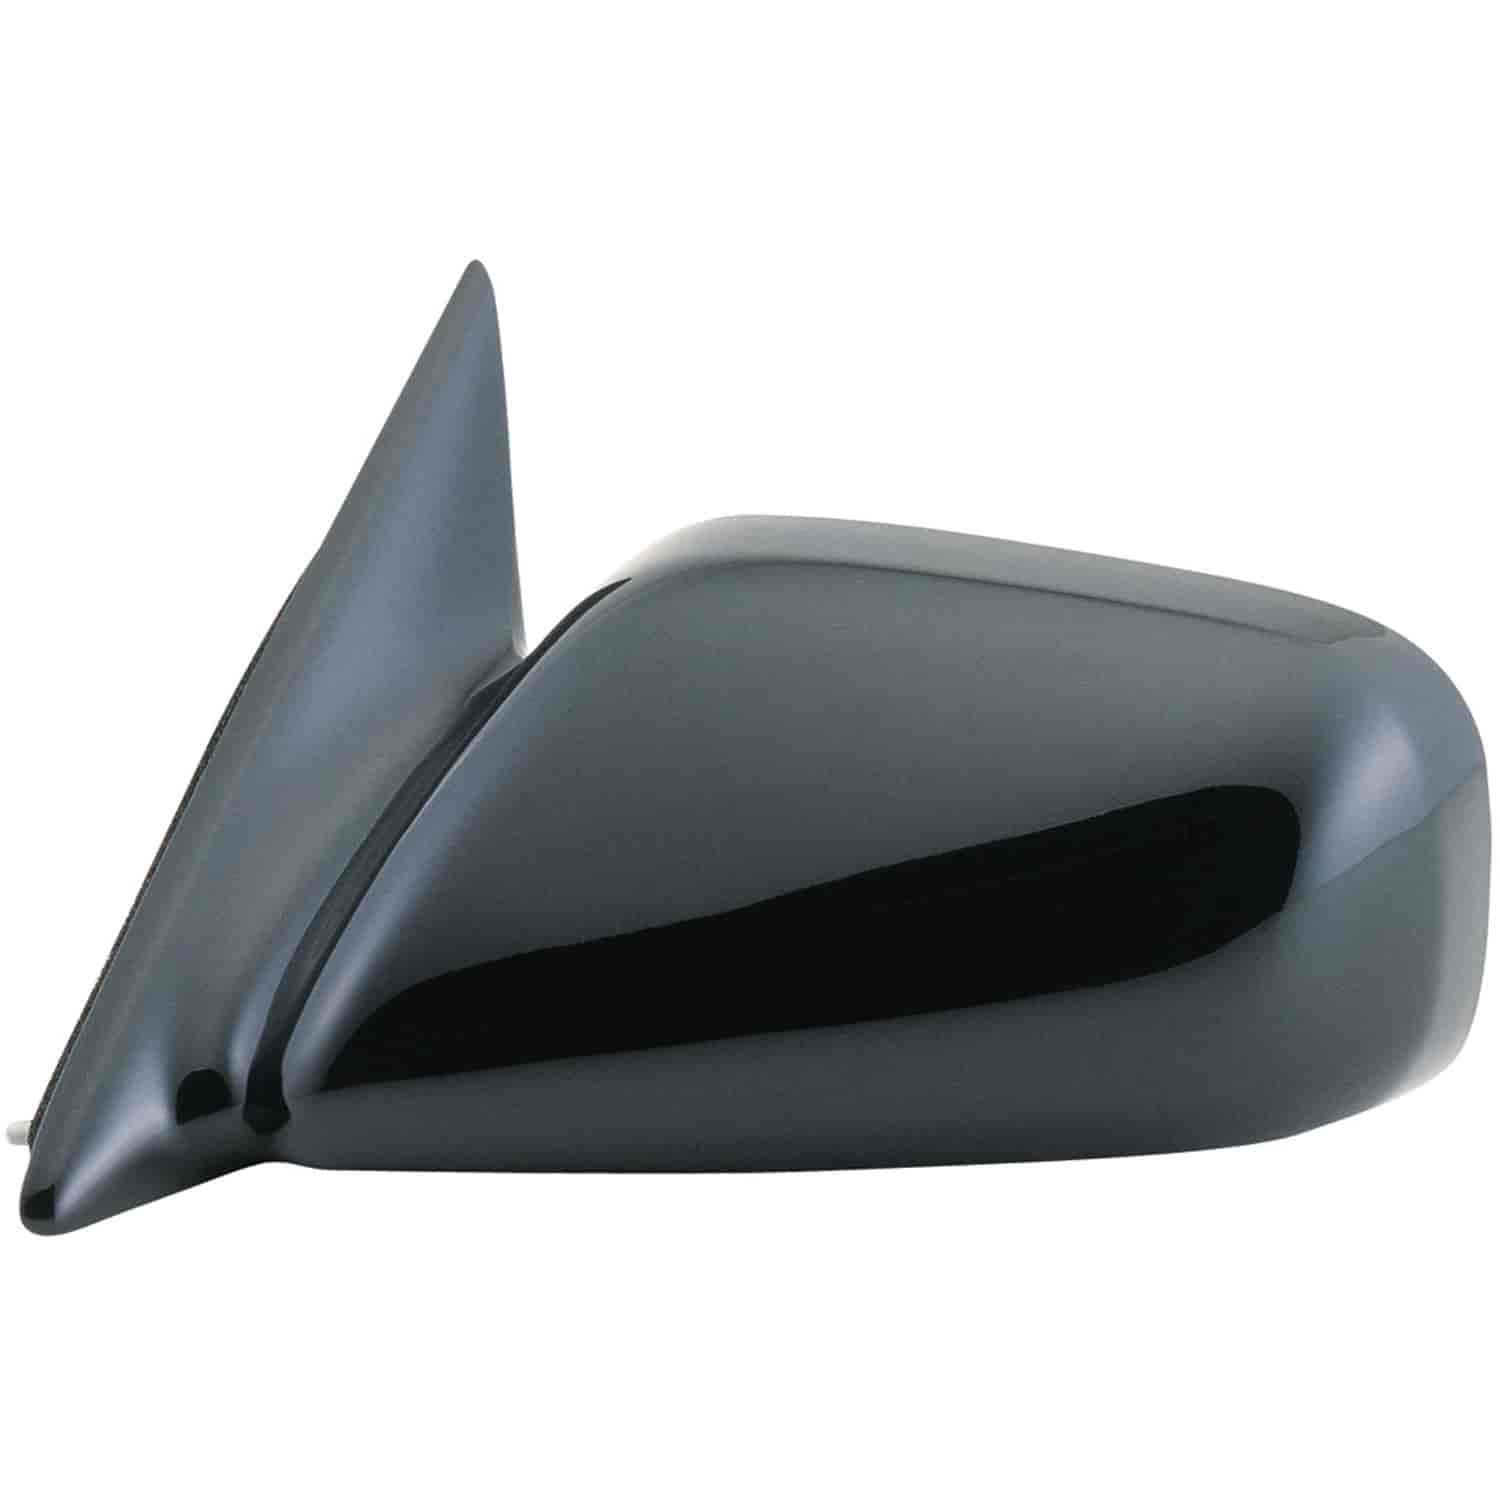 OEM Style Replacement mirror for 97-01 Toyota Camry Japan built driver side mirror tested to fit and